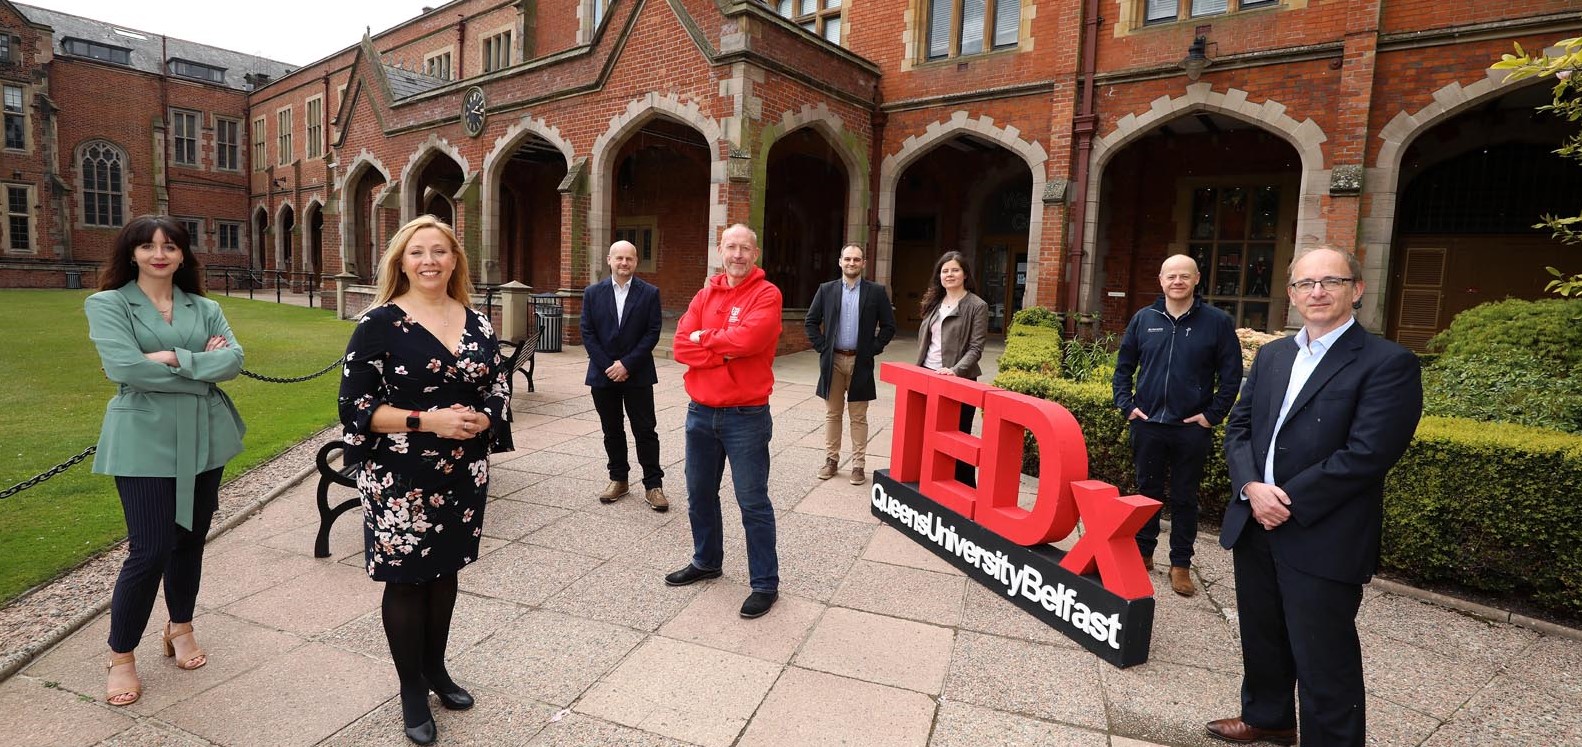 Image shows staff and experts in The Quad at Queen's University Belfast with a TEDx sign